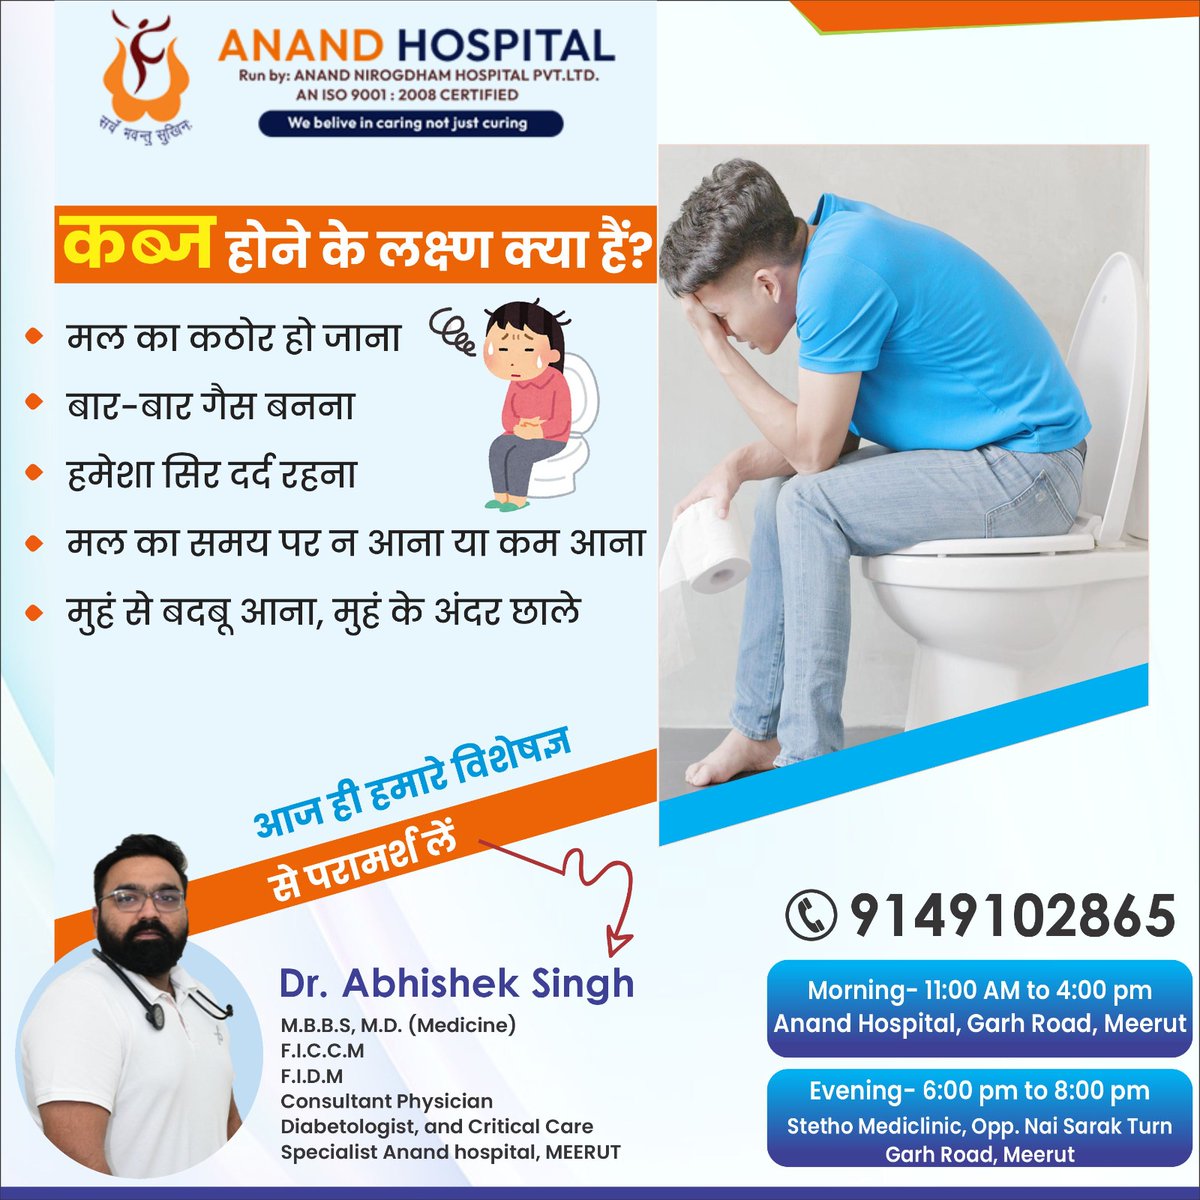 कब्ज होने के लक्ष्ण क्या हैं? 🤢
• मल का कठोर हो जाना
• बार-बार गैस बनना
.
#ConstipationSymptoms #DigestiveIssues #HealthyLiving #ConsultExperts #HealthyHeart #WellnessTips #QuitSmoking #HealthyLifestyle #NoTobacco #NoAlcohol #EatHealthy #ExerciseDaily #StayFit #HealthyHabits